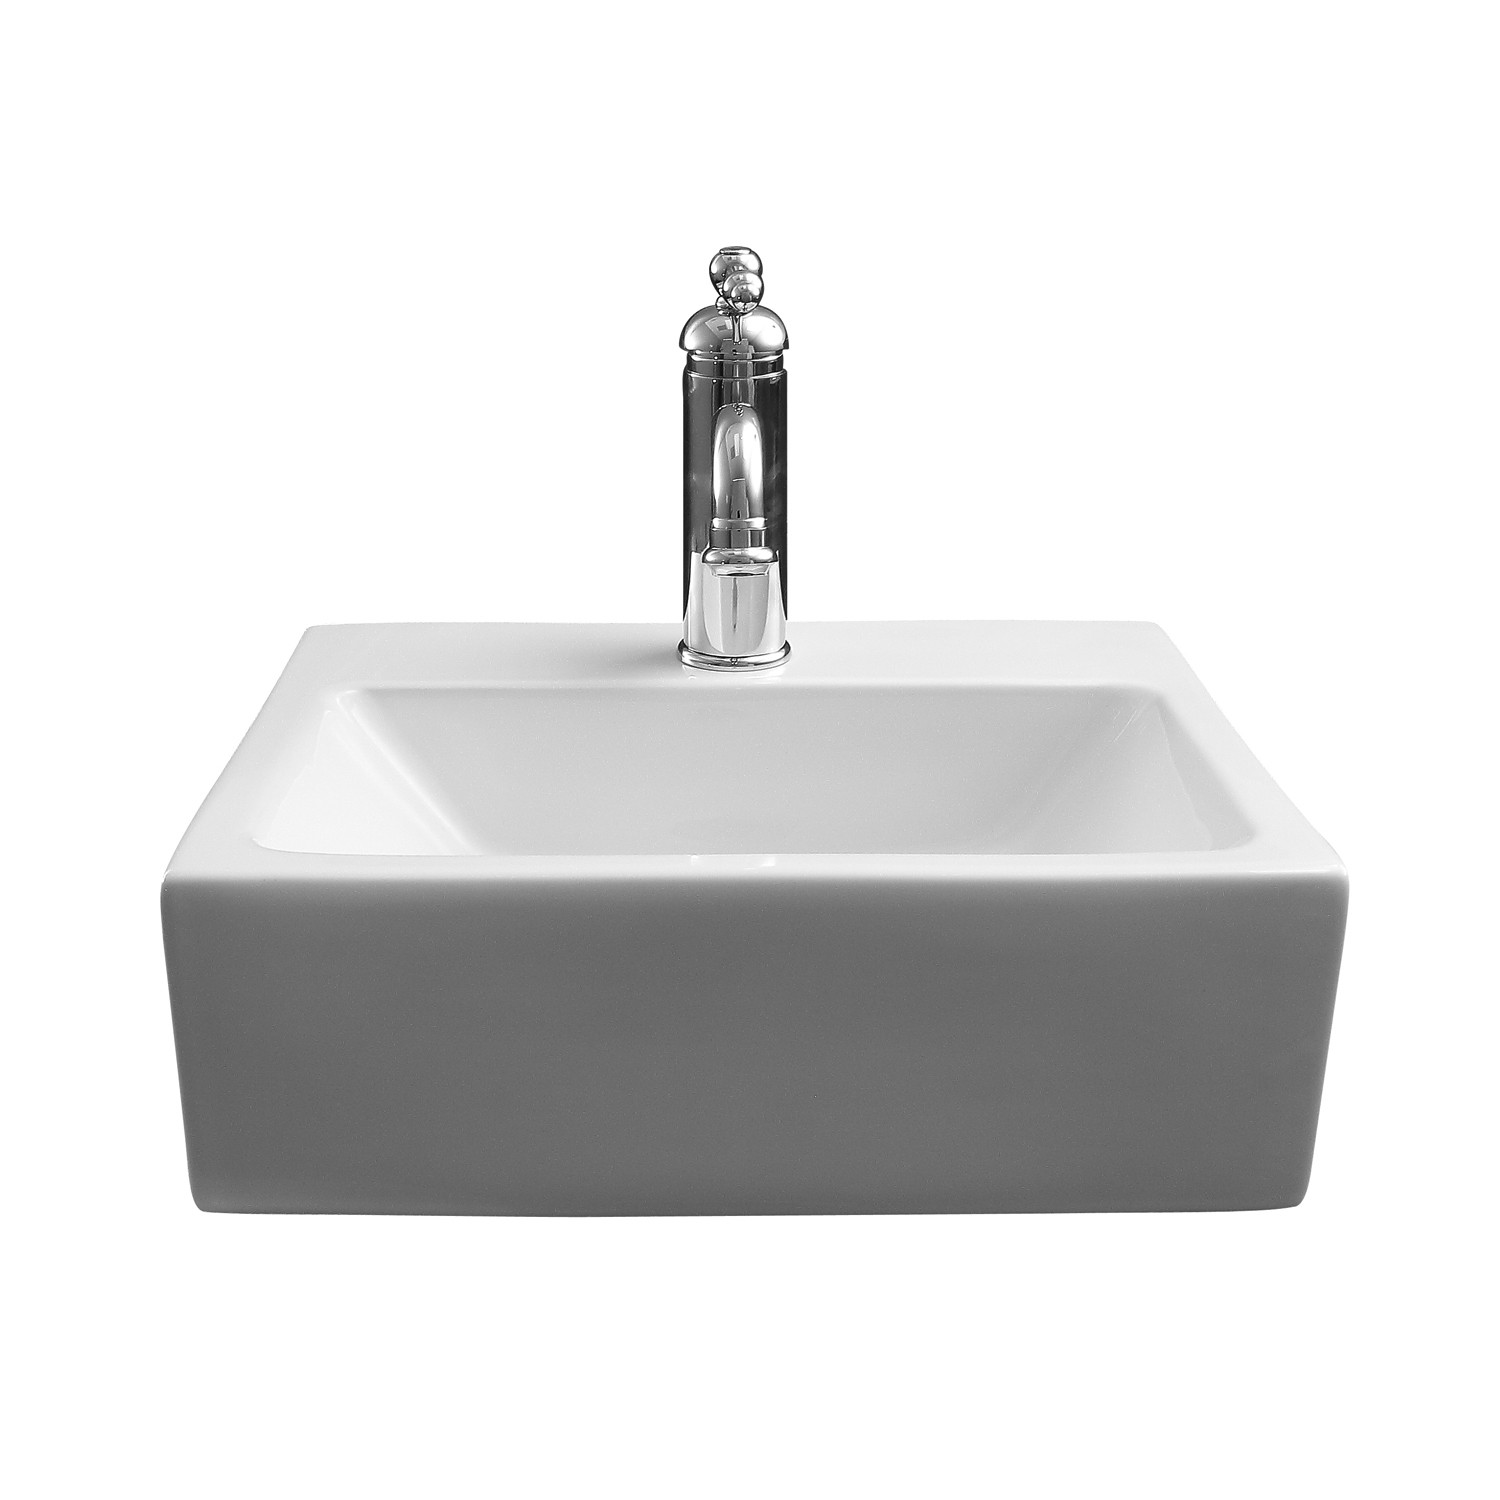 BARCLAY 4-9060WH LINDEN 16 3/4 INCH SINGLE BASIN WALL MOUNT BATHROOM SINK - WHITE